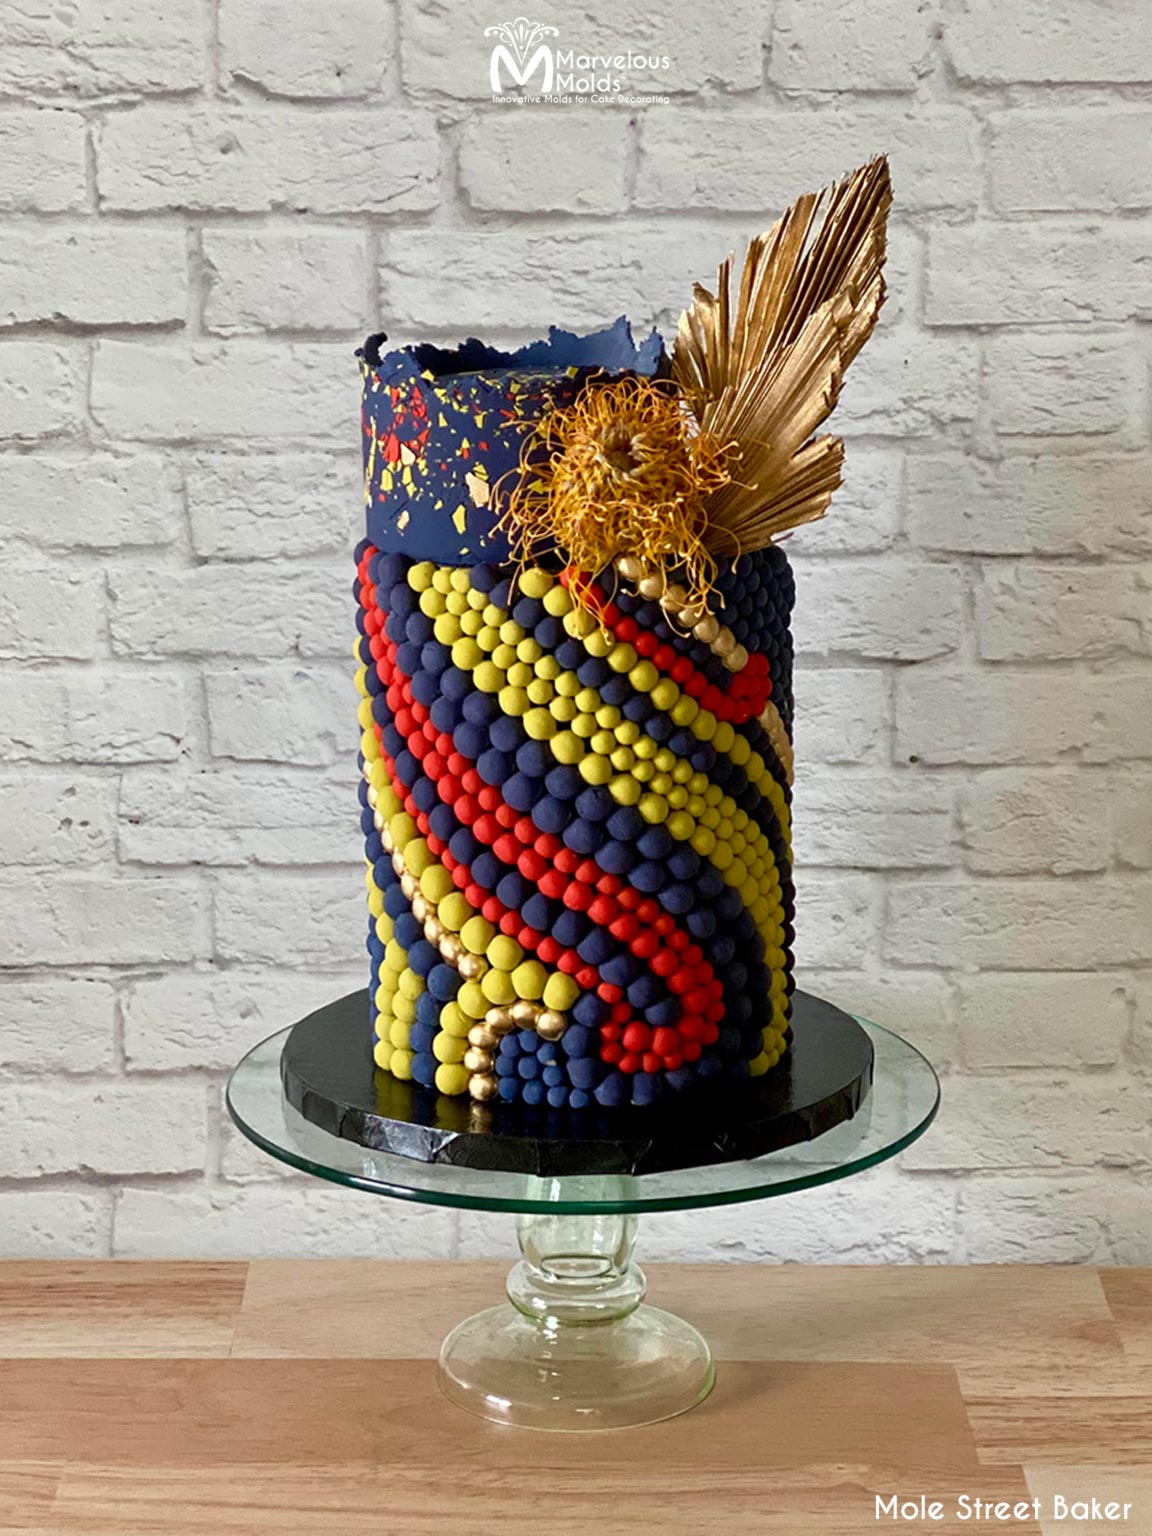 Red Yellow Blue Cake Decorated with Full Pearl Strings, Created Using the Marvelous Molds PinchPro Pearls 8mm Silicone Mold